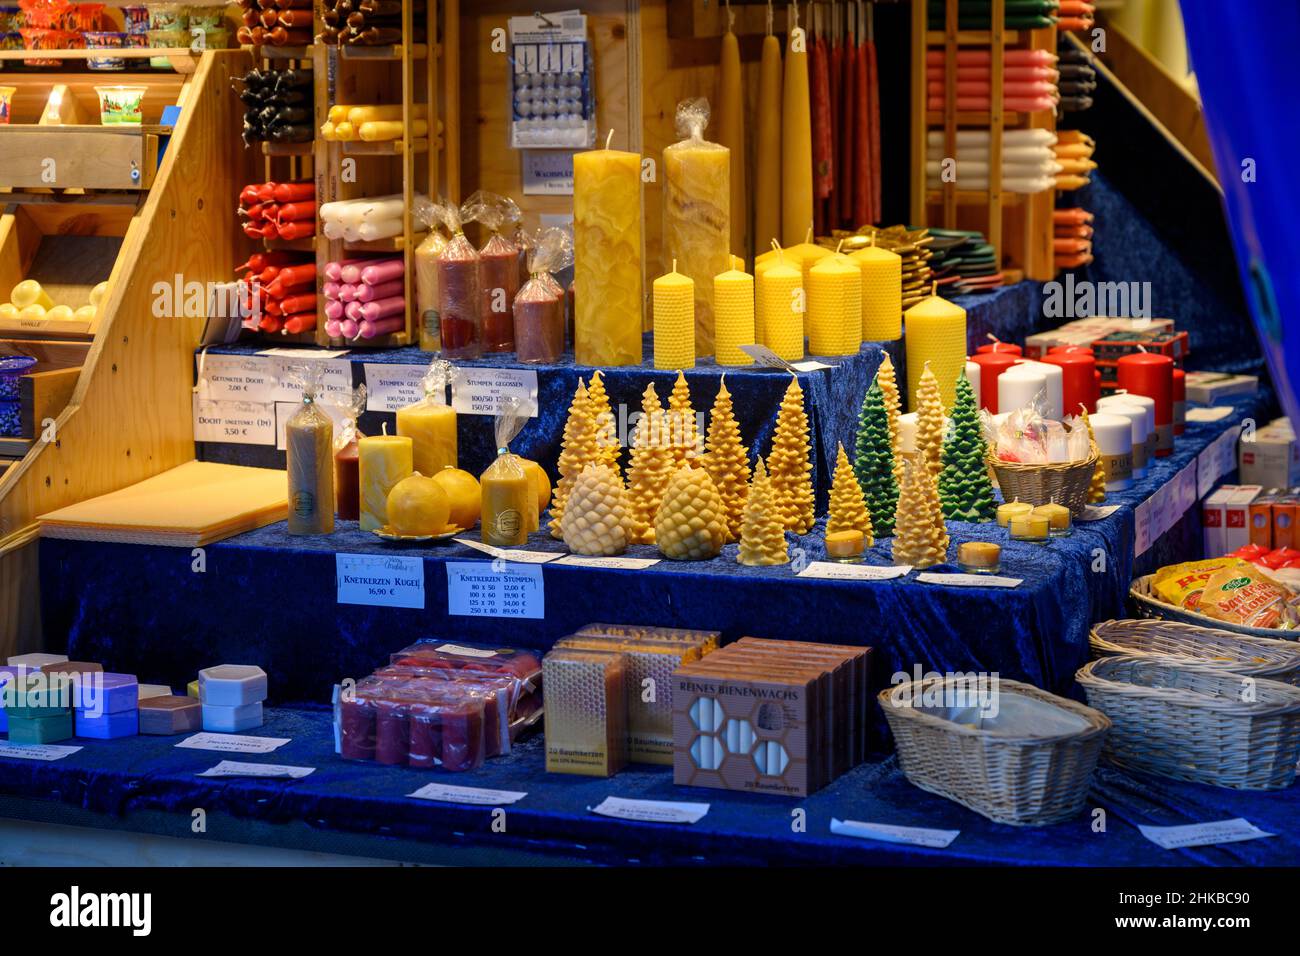 A stall at the Christmas market sells candles in Düsseldorf, NRW, Germany on Dec. 11, 2021. Stock Photo